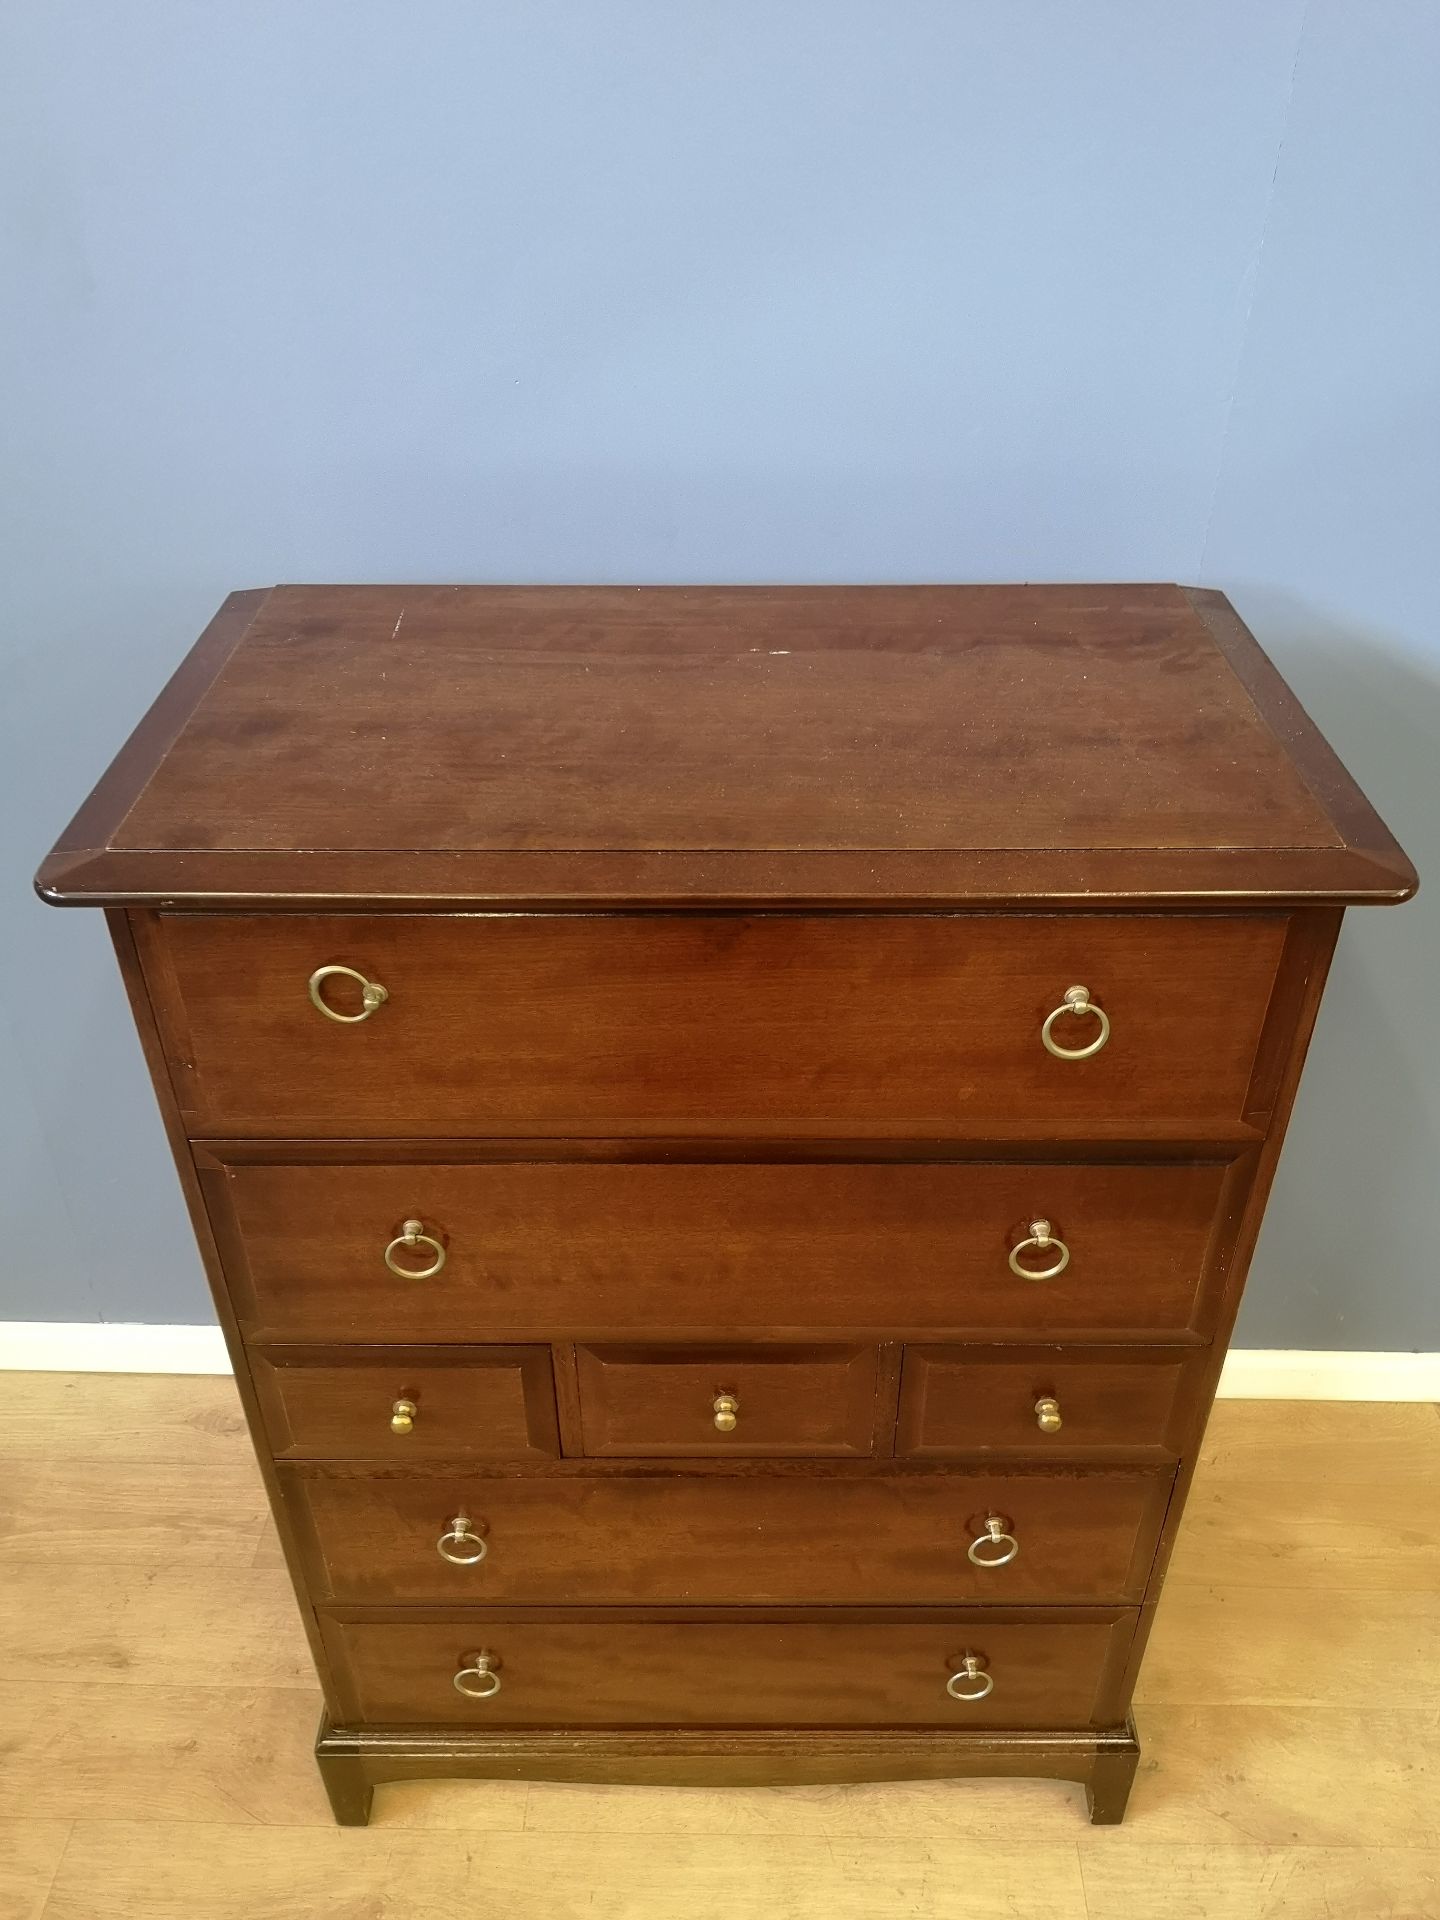 Stag chest of drawers - Image 2 of 6